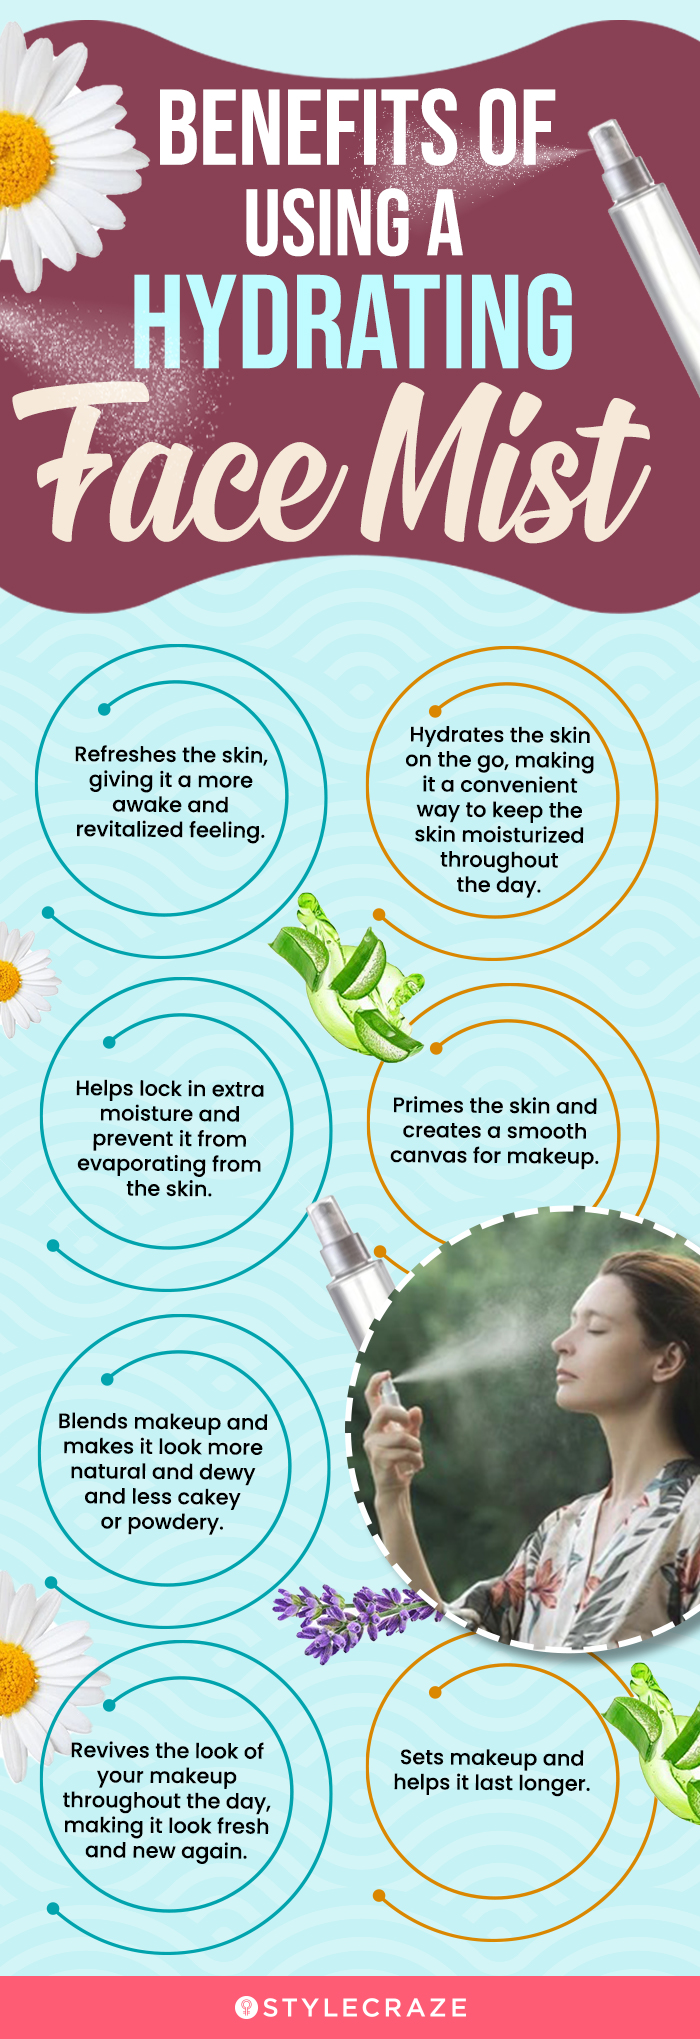 Benefits OF Using A Hydrating Face Mist (infographic)